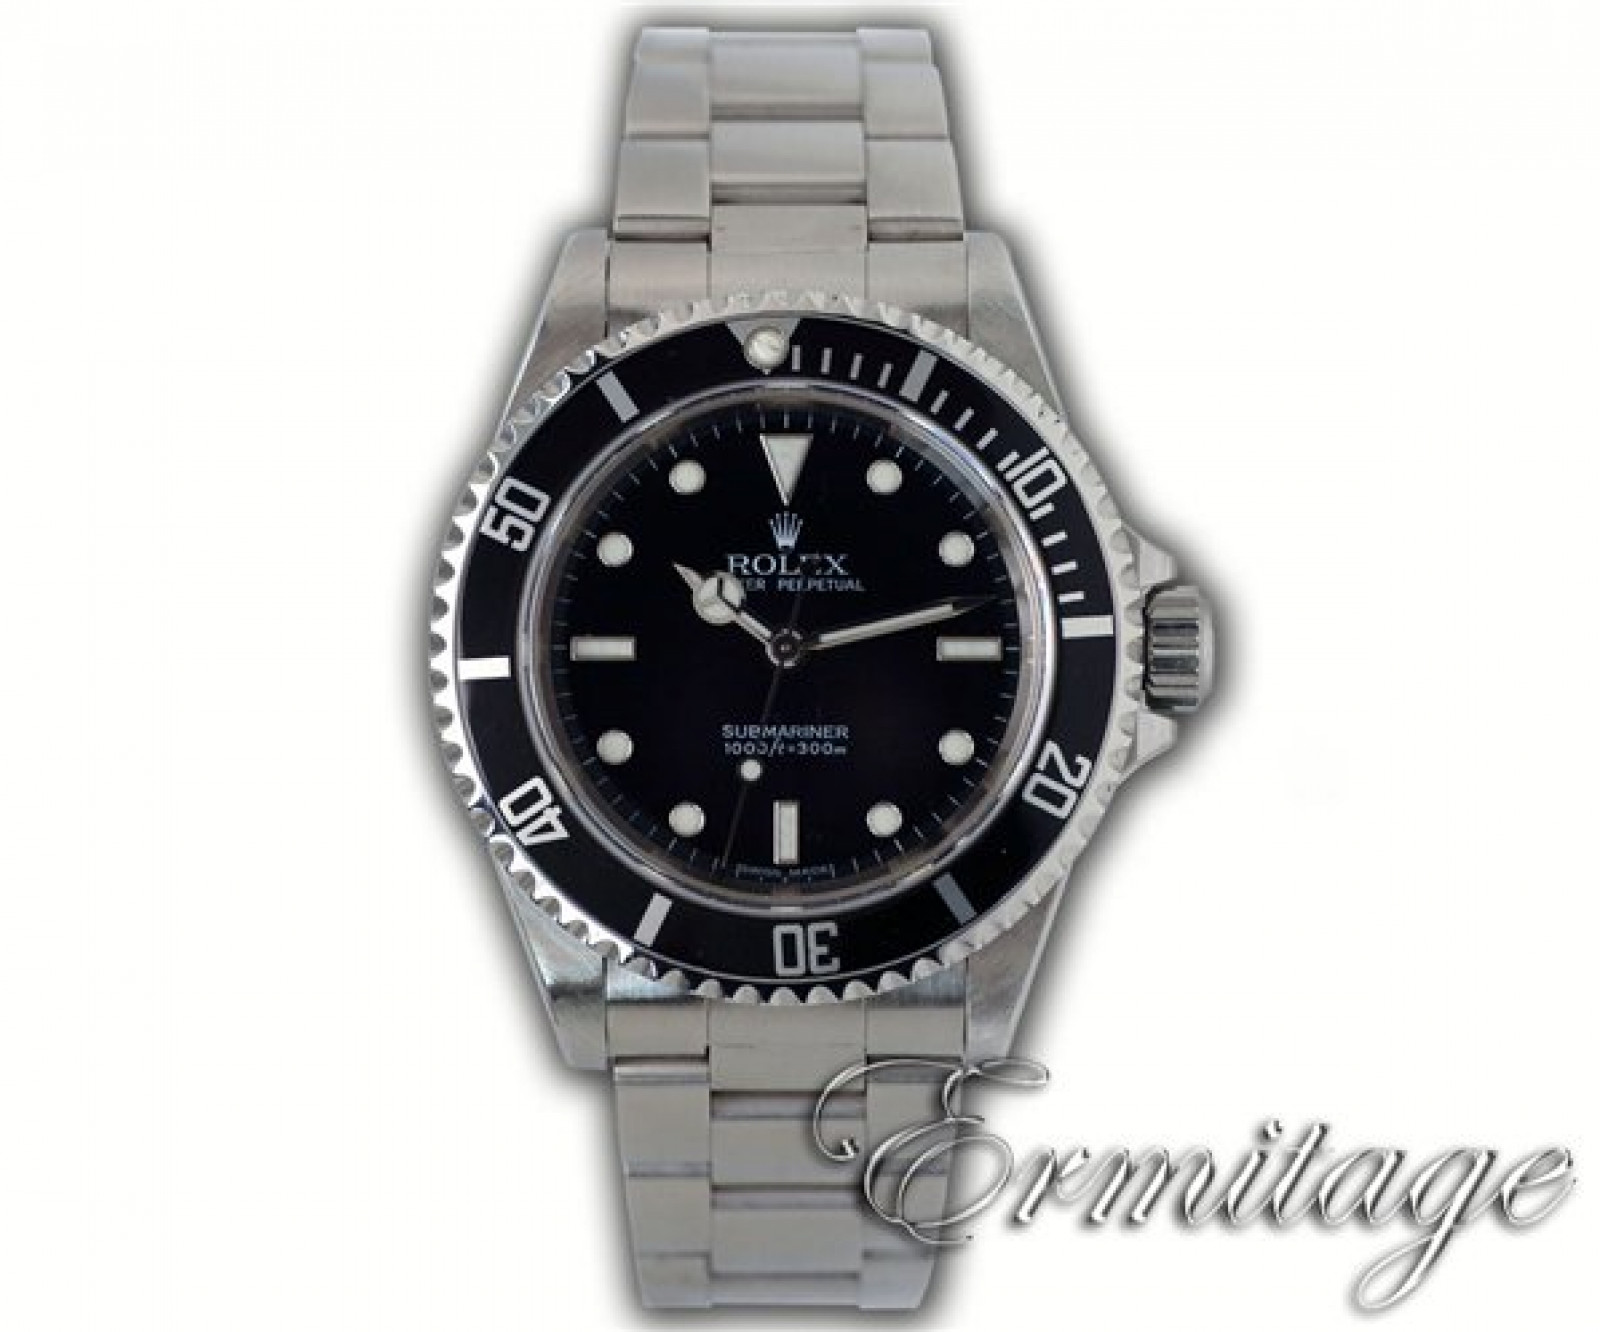 Pre-Owned Rolex Submariner 14060M Steel Year 2004